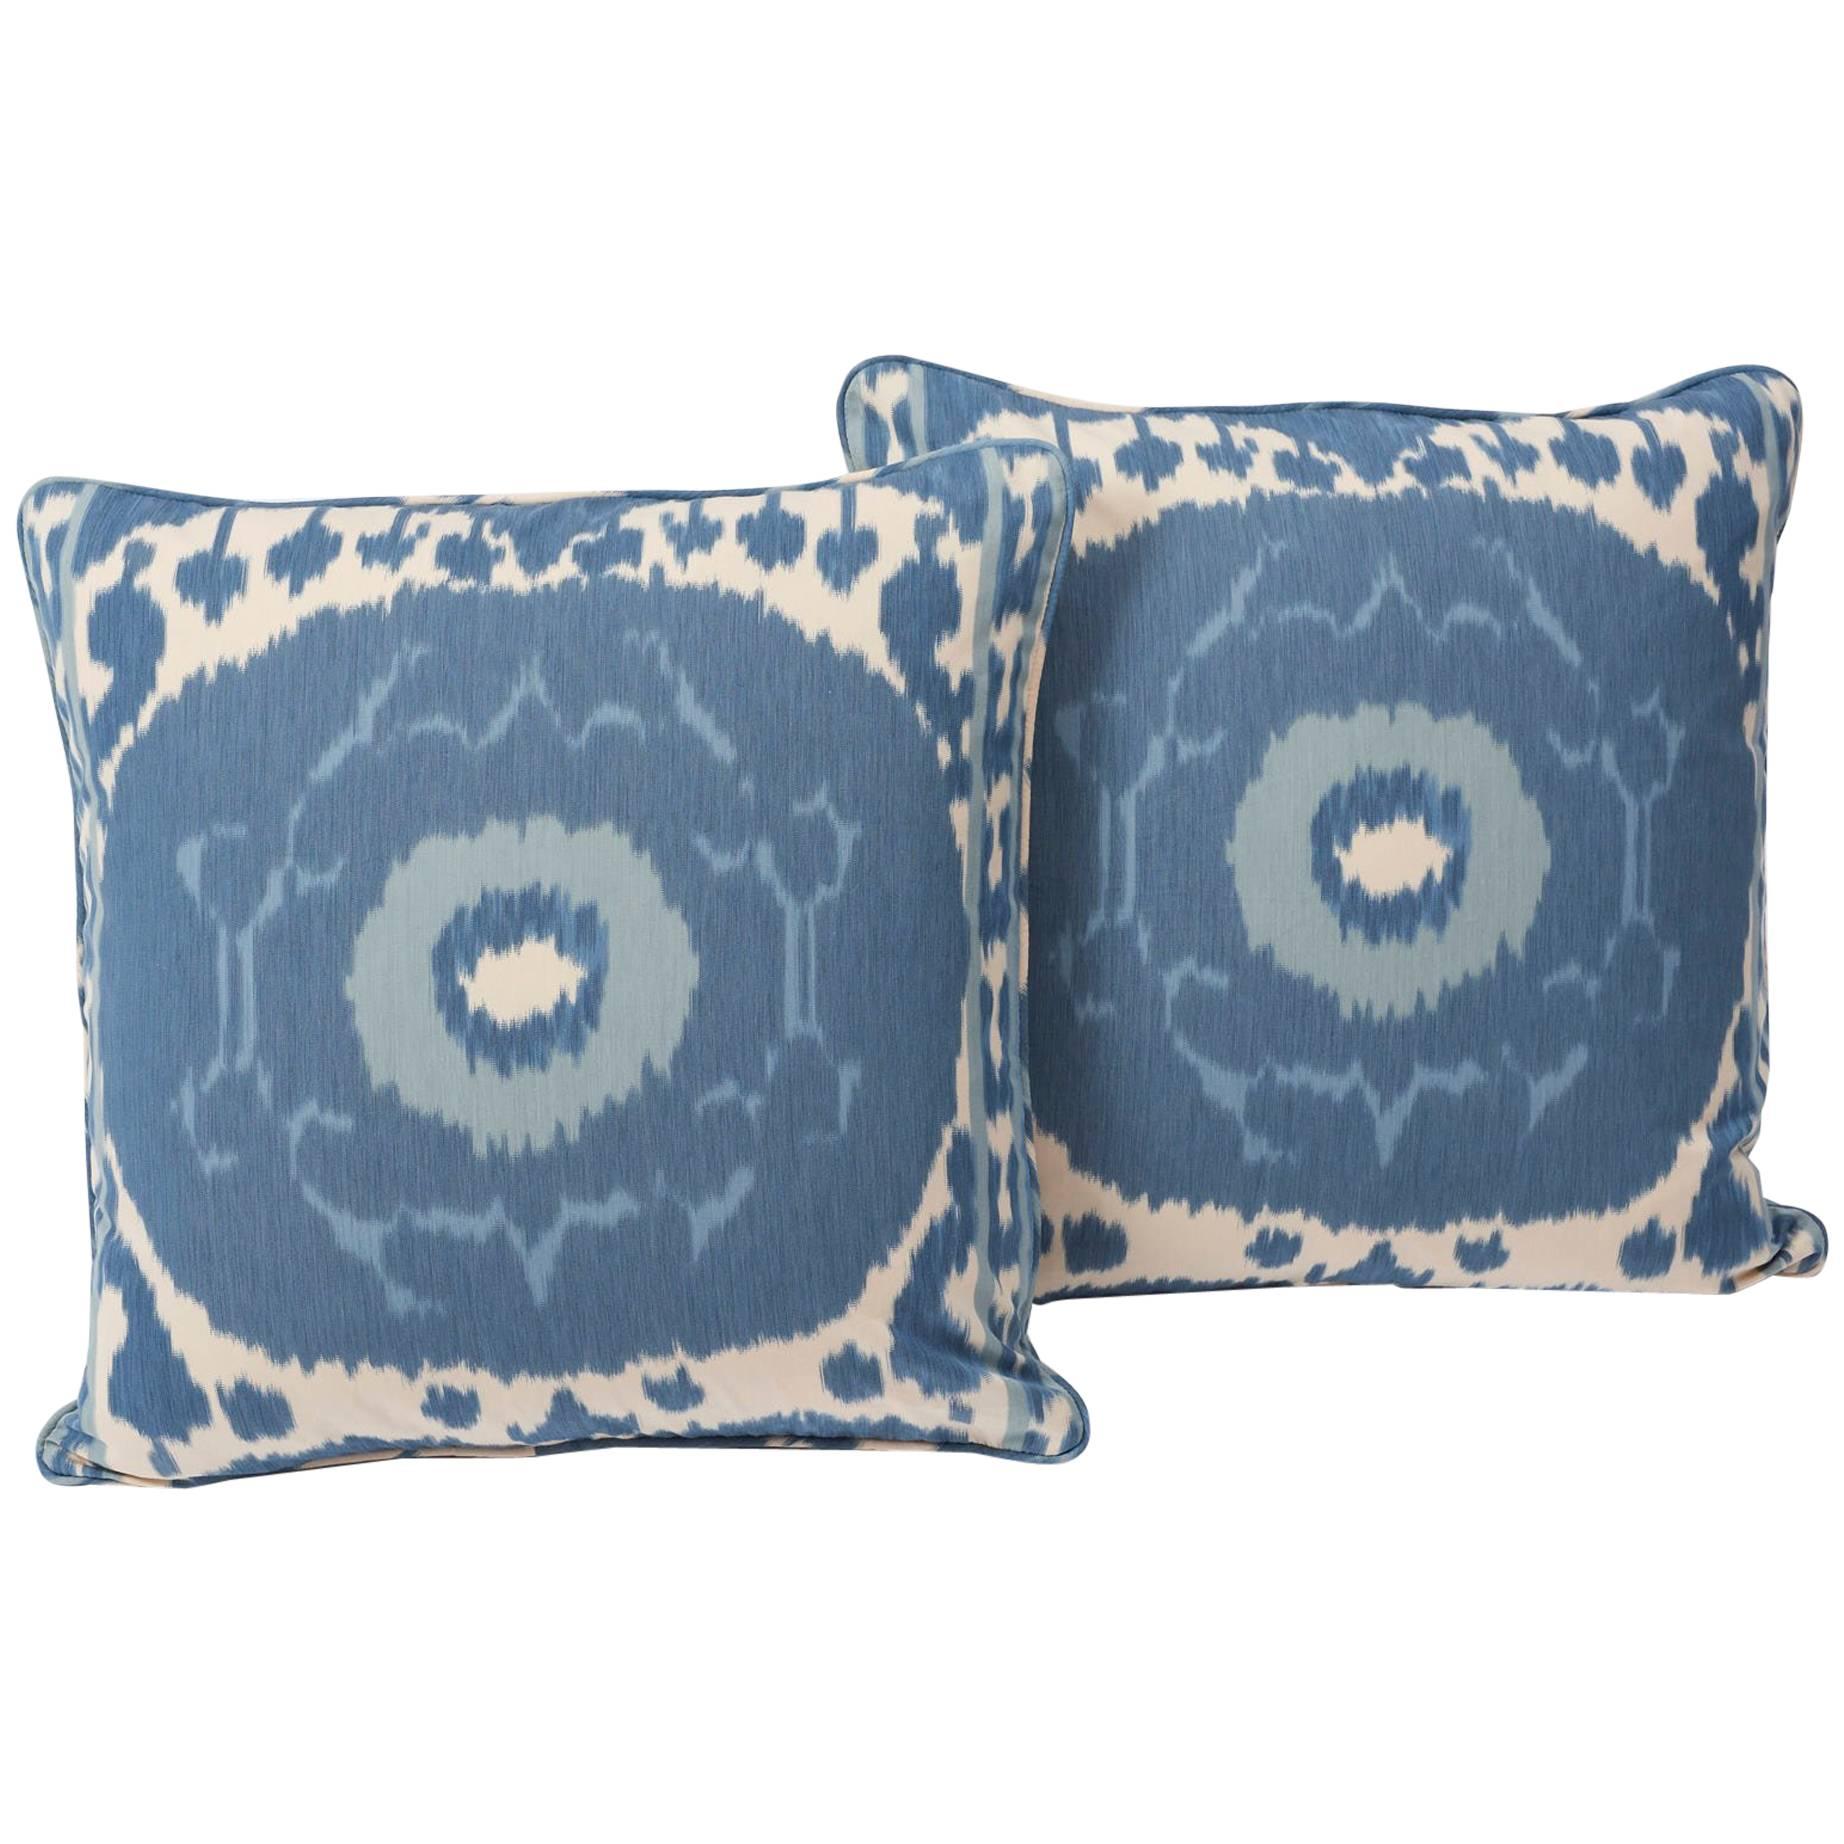 A true warp print produced with traditional Ikat methods, Samarkand Ikat II is a signature Schumacher design that is beloved for its bold scale and pattern. Now featured as a set of decorative accents, this pair is sure to enhance any decor or